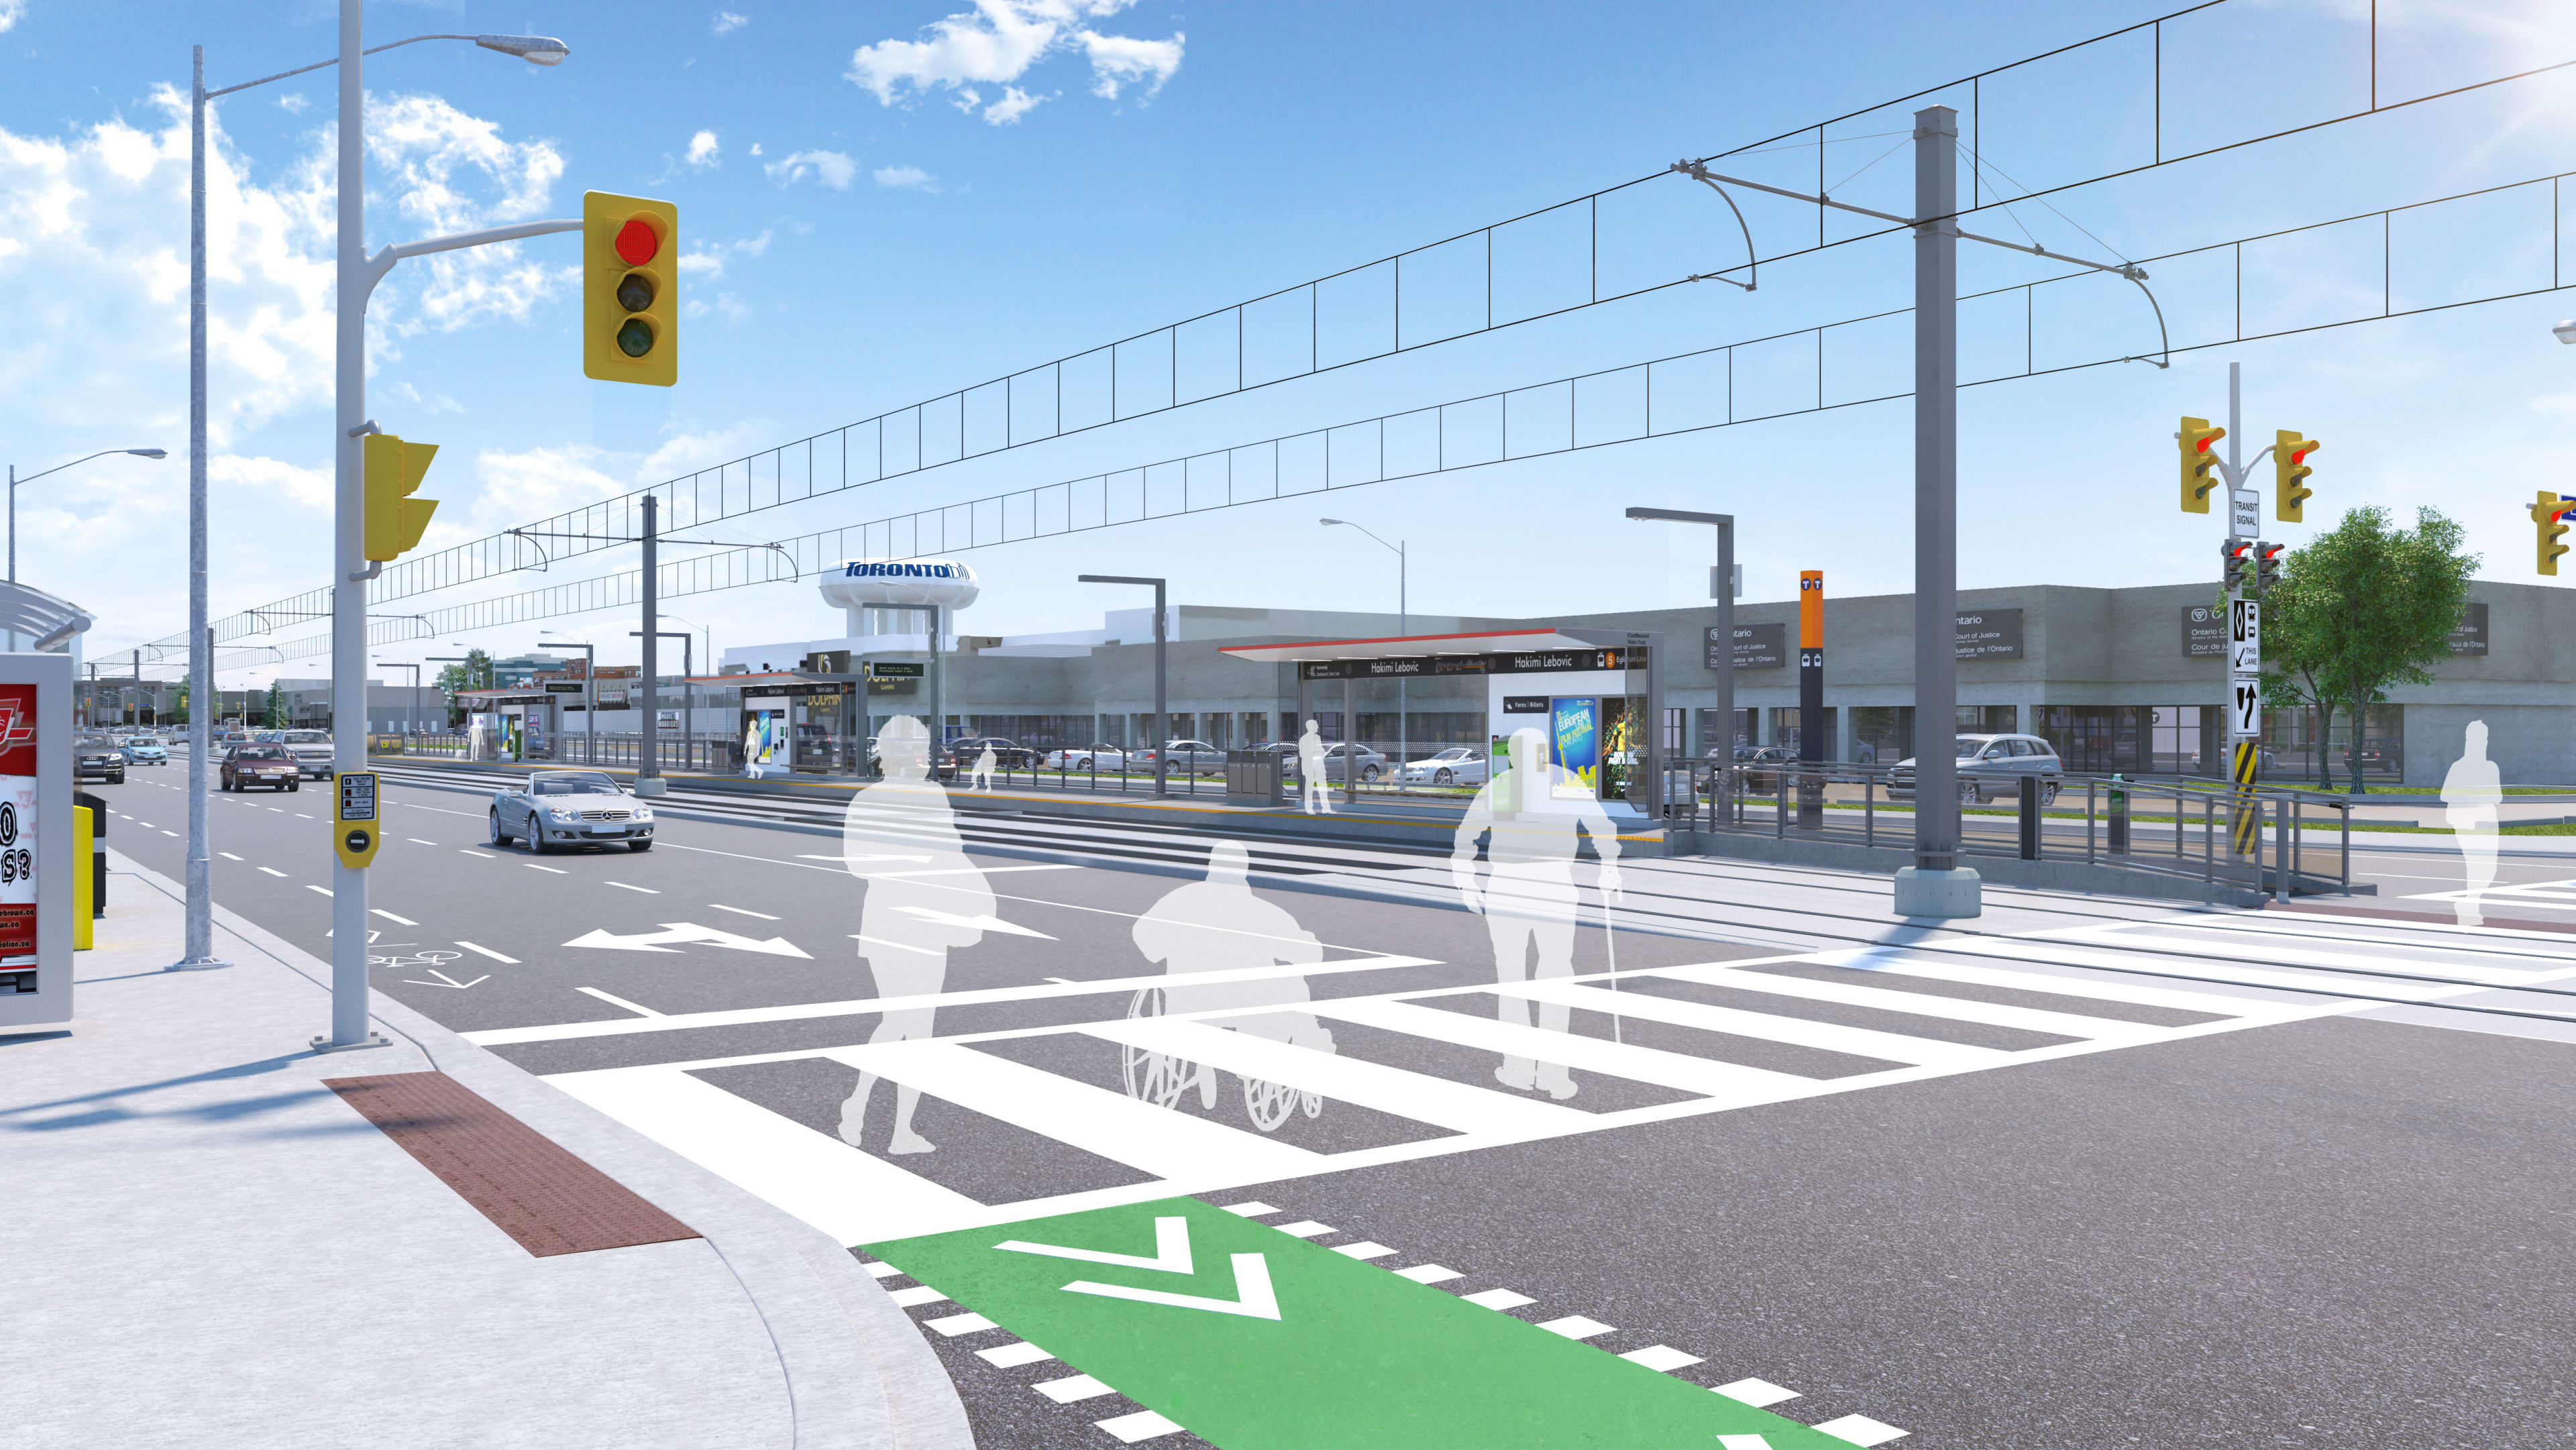 An artist concept shows customers crossing the road to get to the LRT stop.